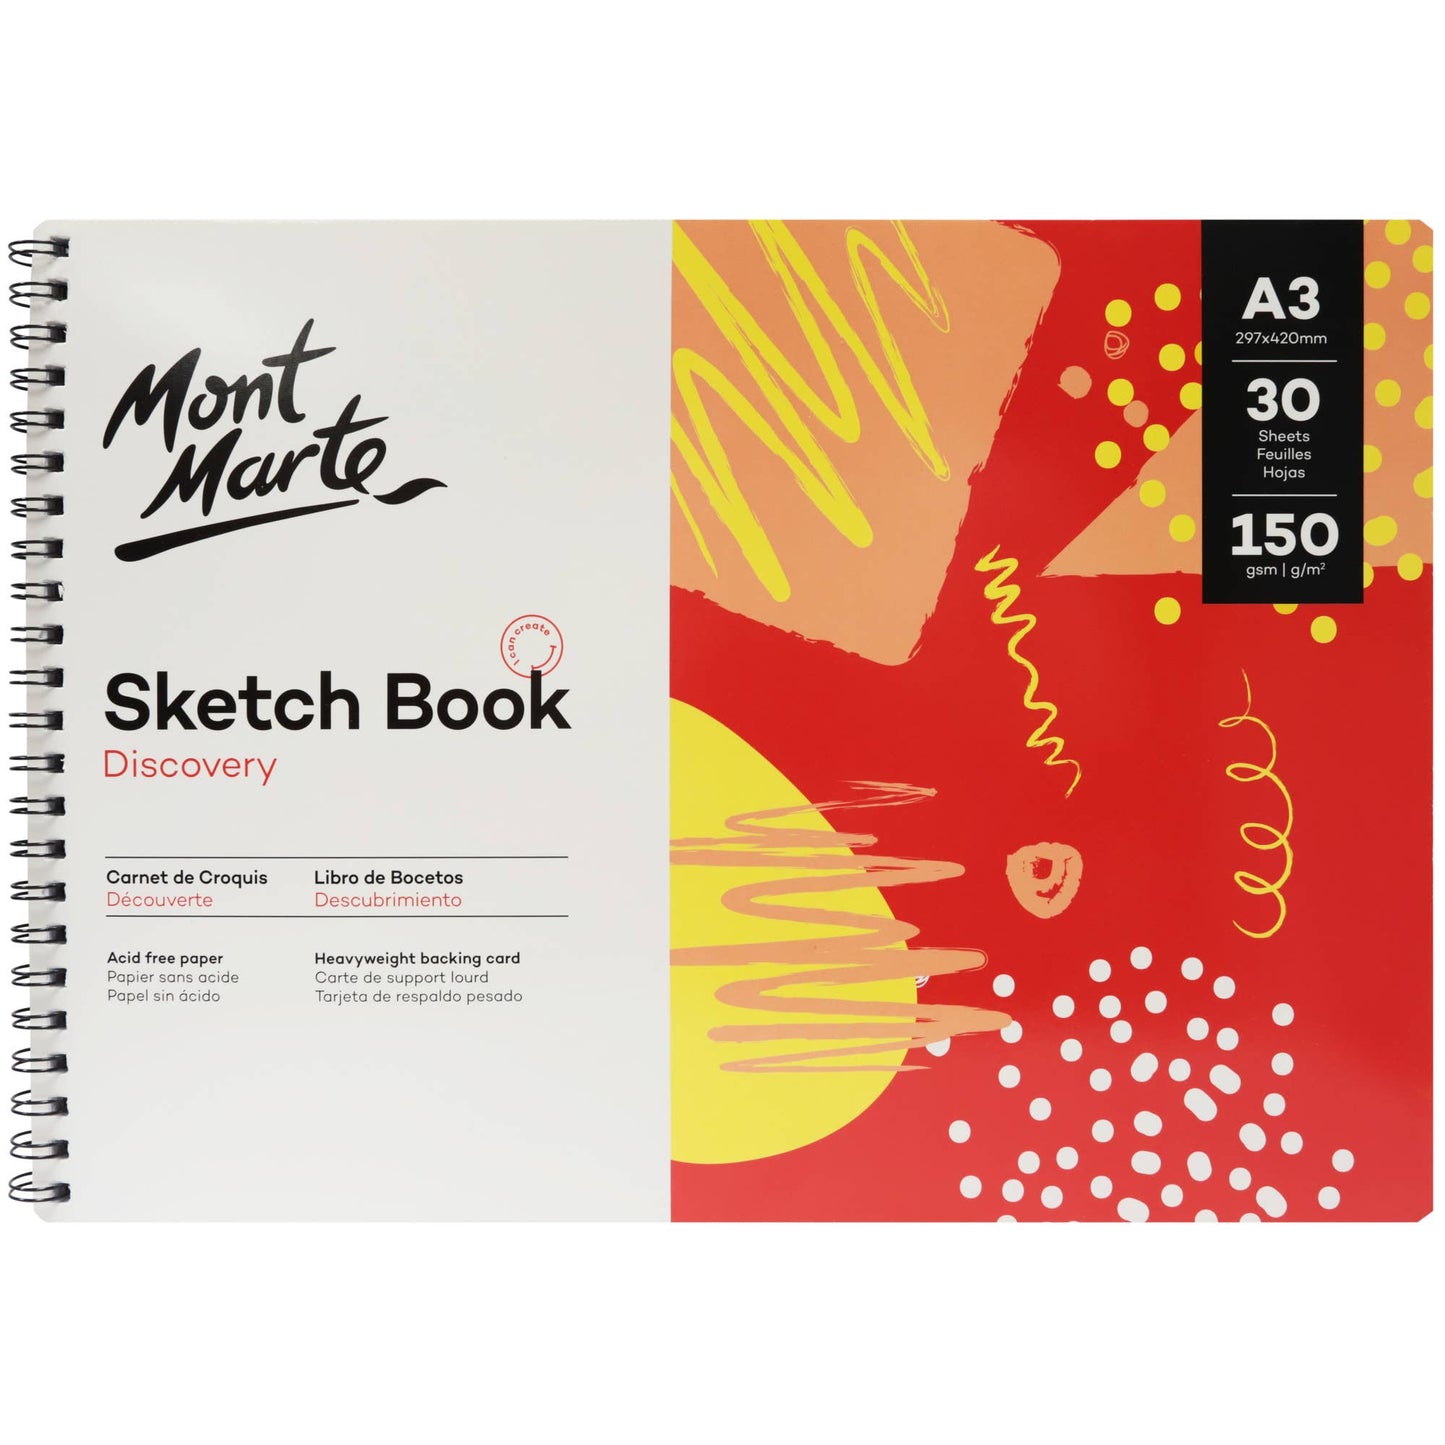 Sketch Book Discovery A3 (11.7 x 16.5in) 30 Sheets 150gsm